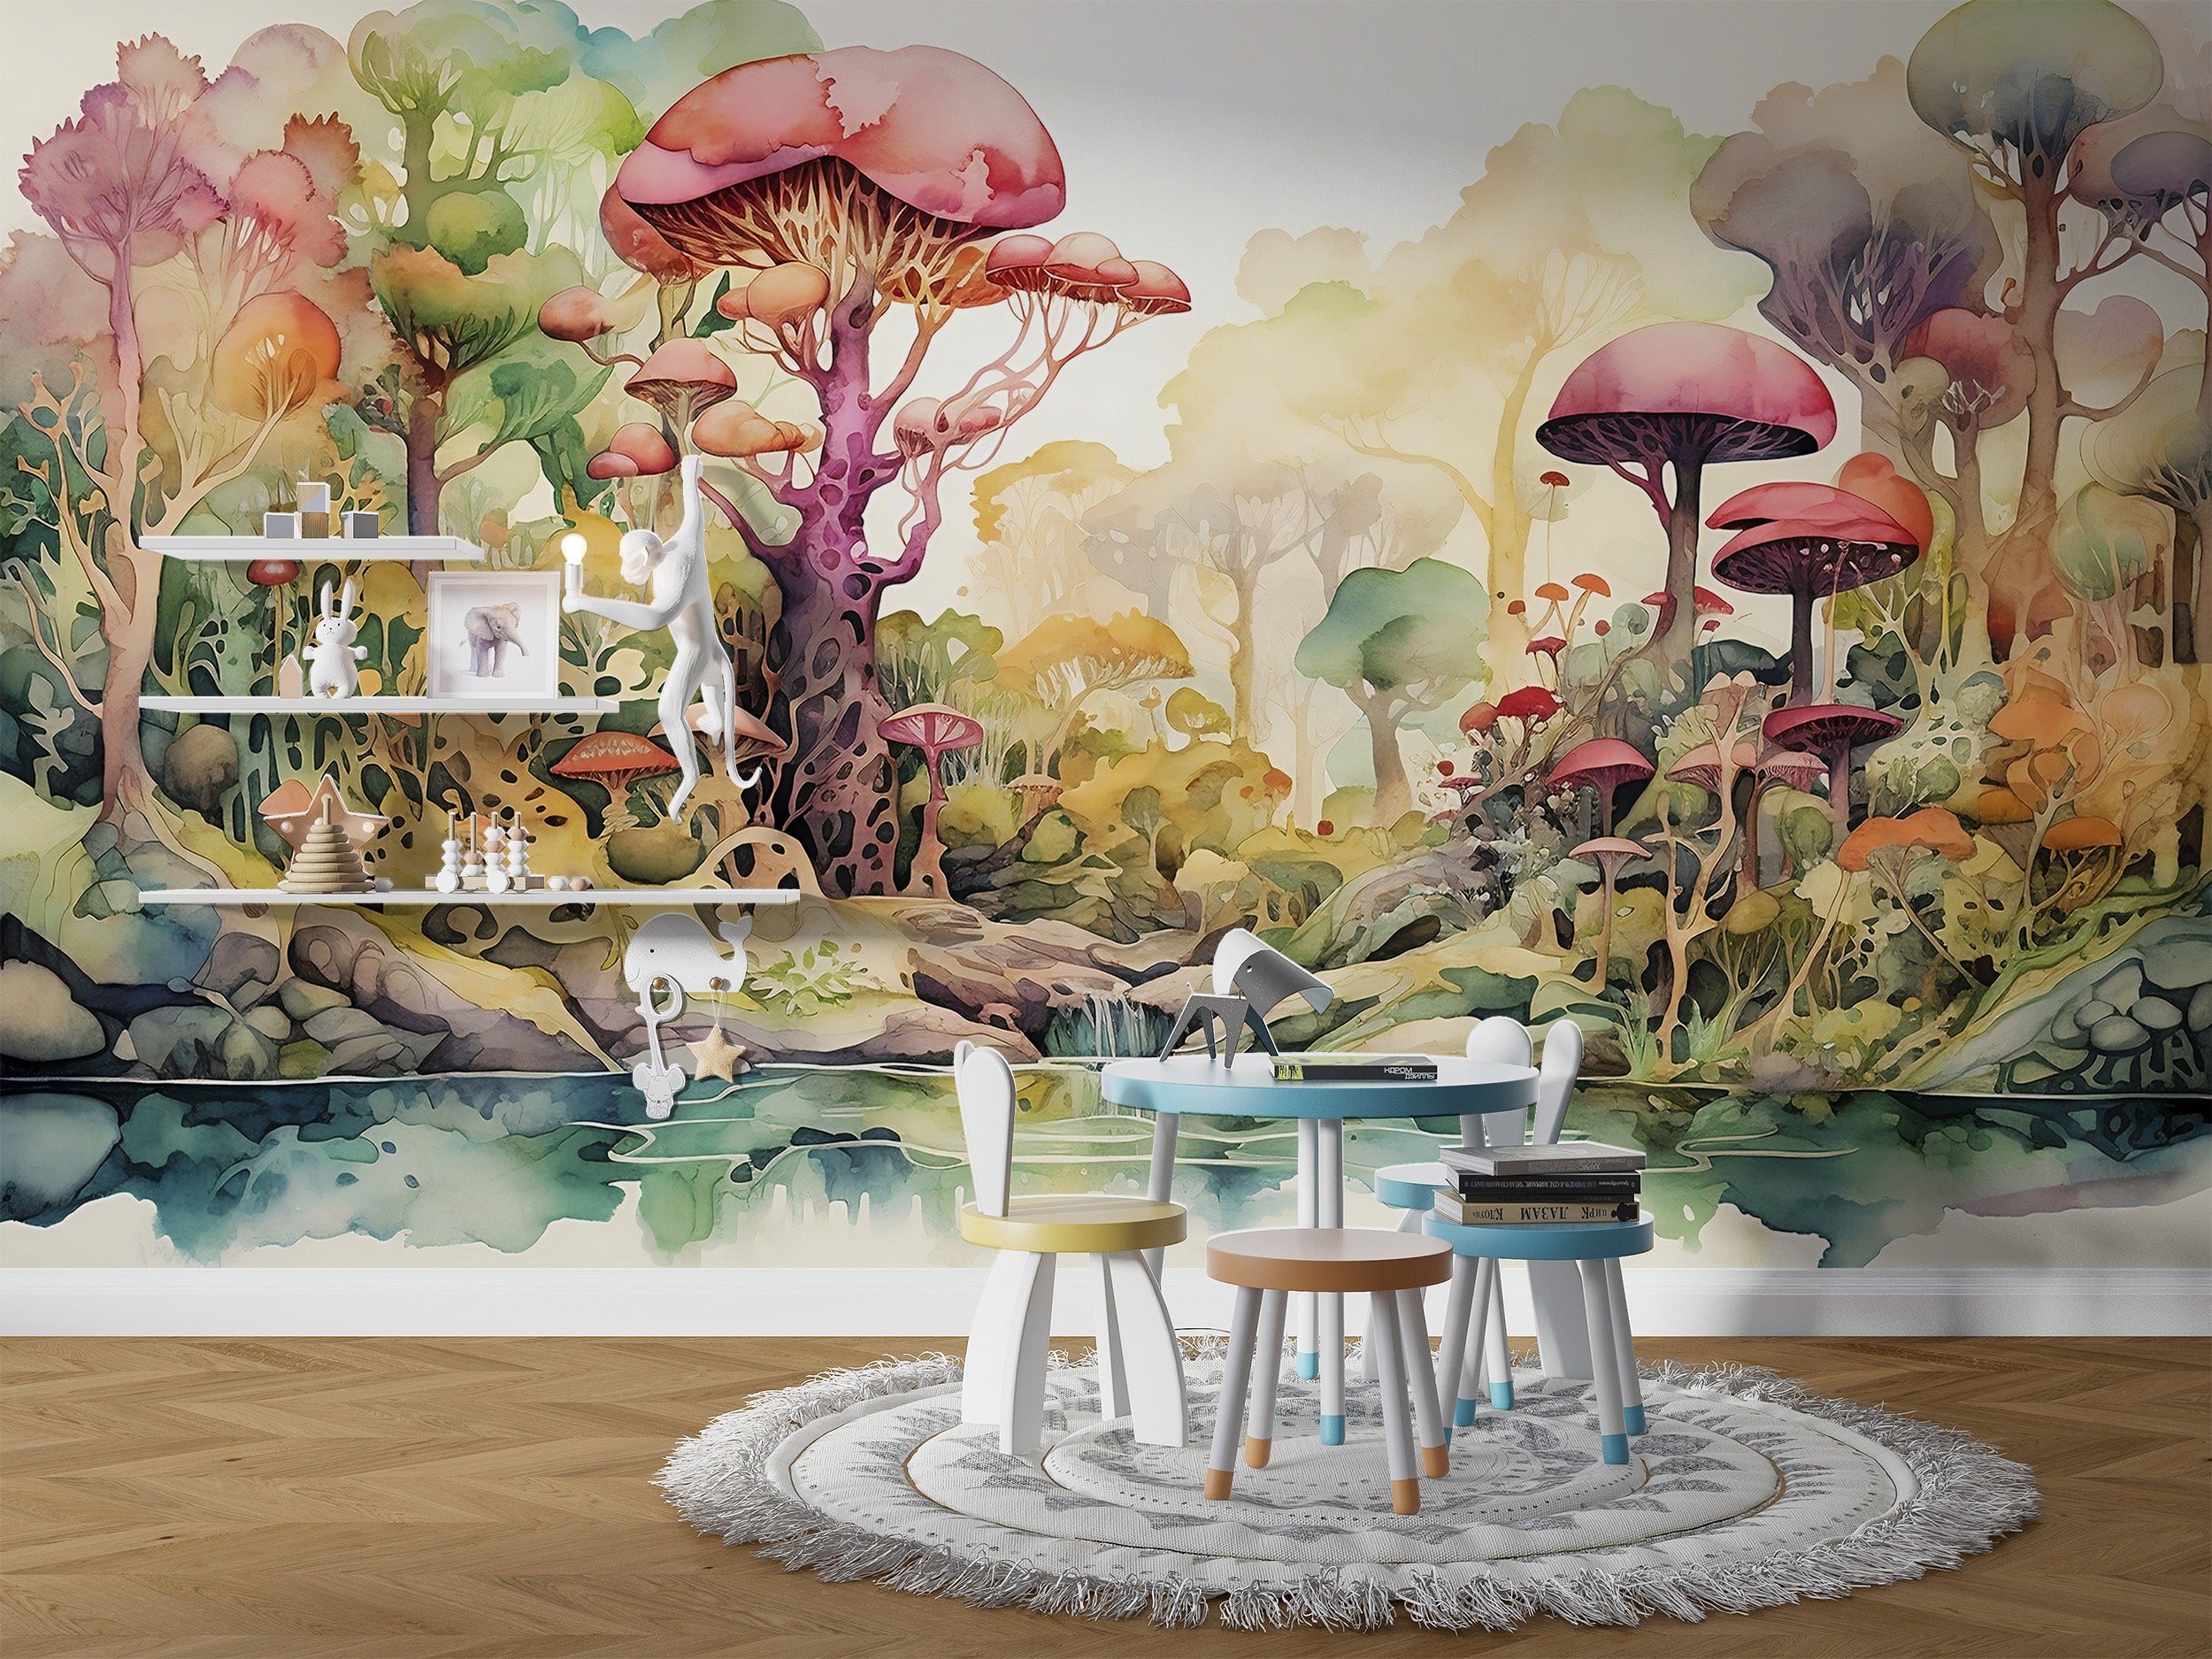 Transform Their Room with Mushroom Forest Wallpaper